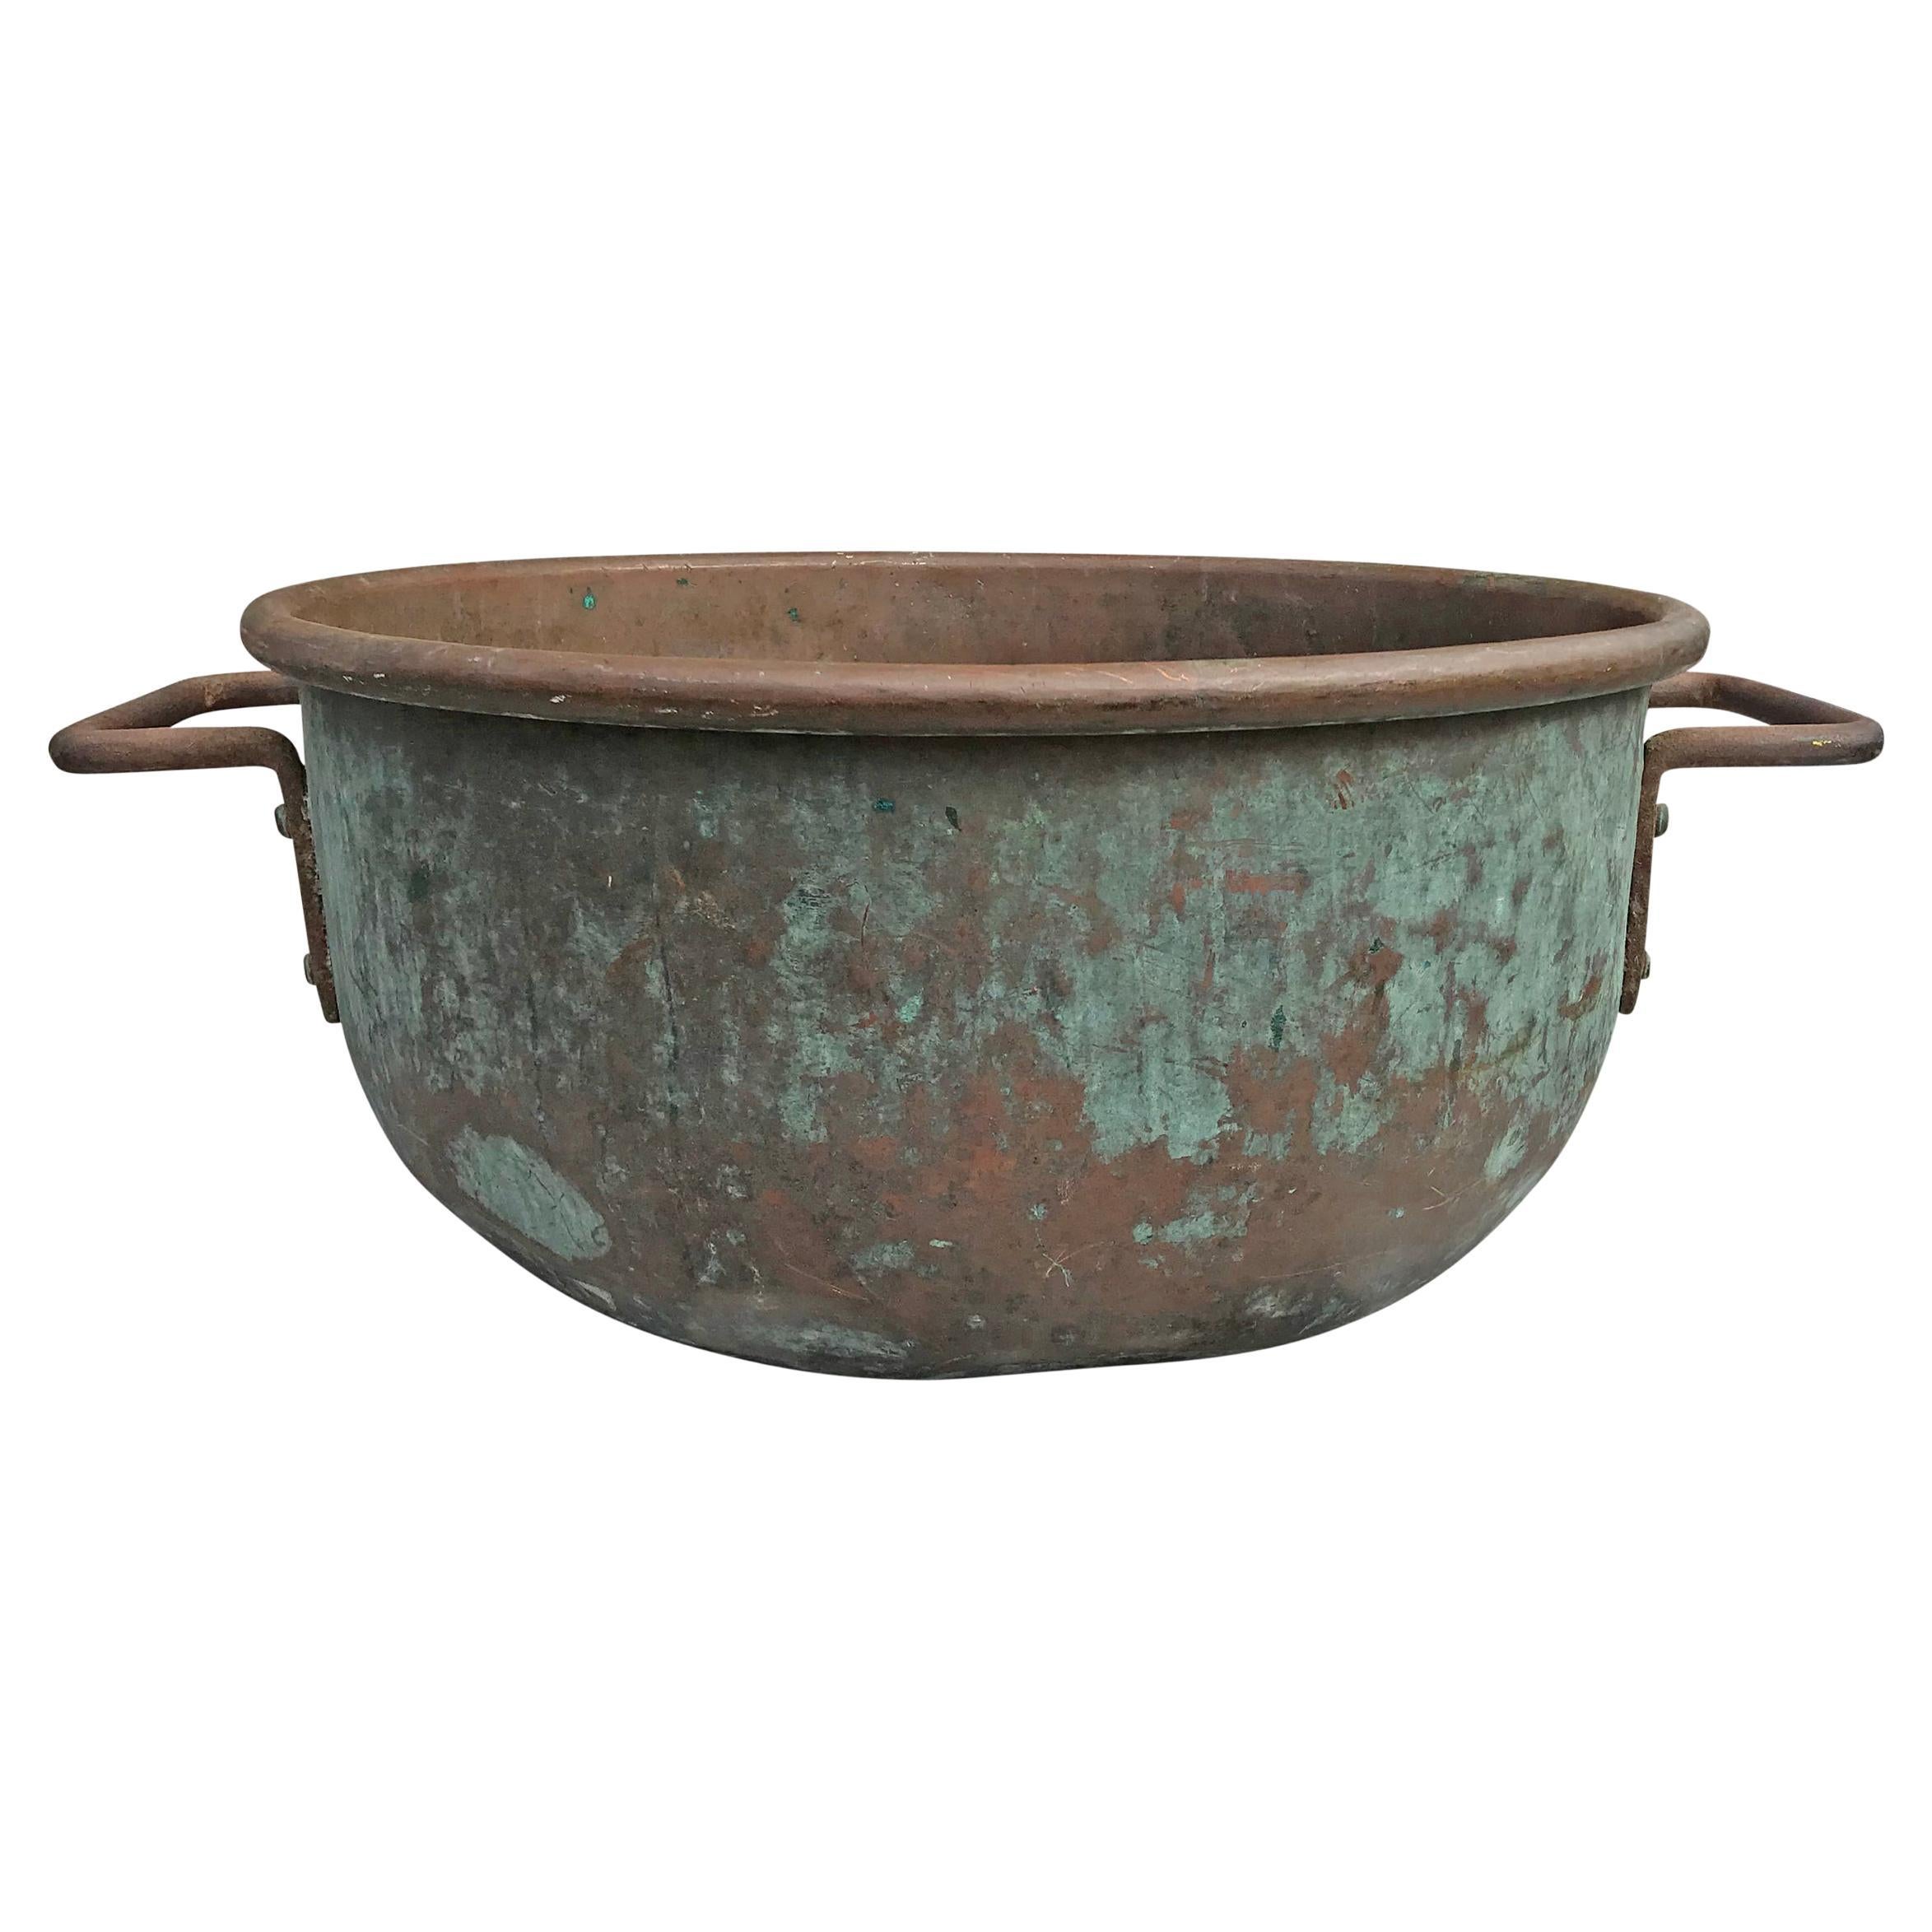 Early 20th Century American Copper Confectioner's Pot